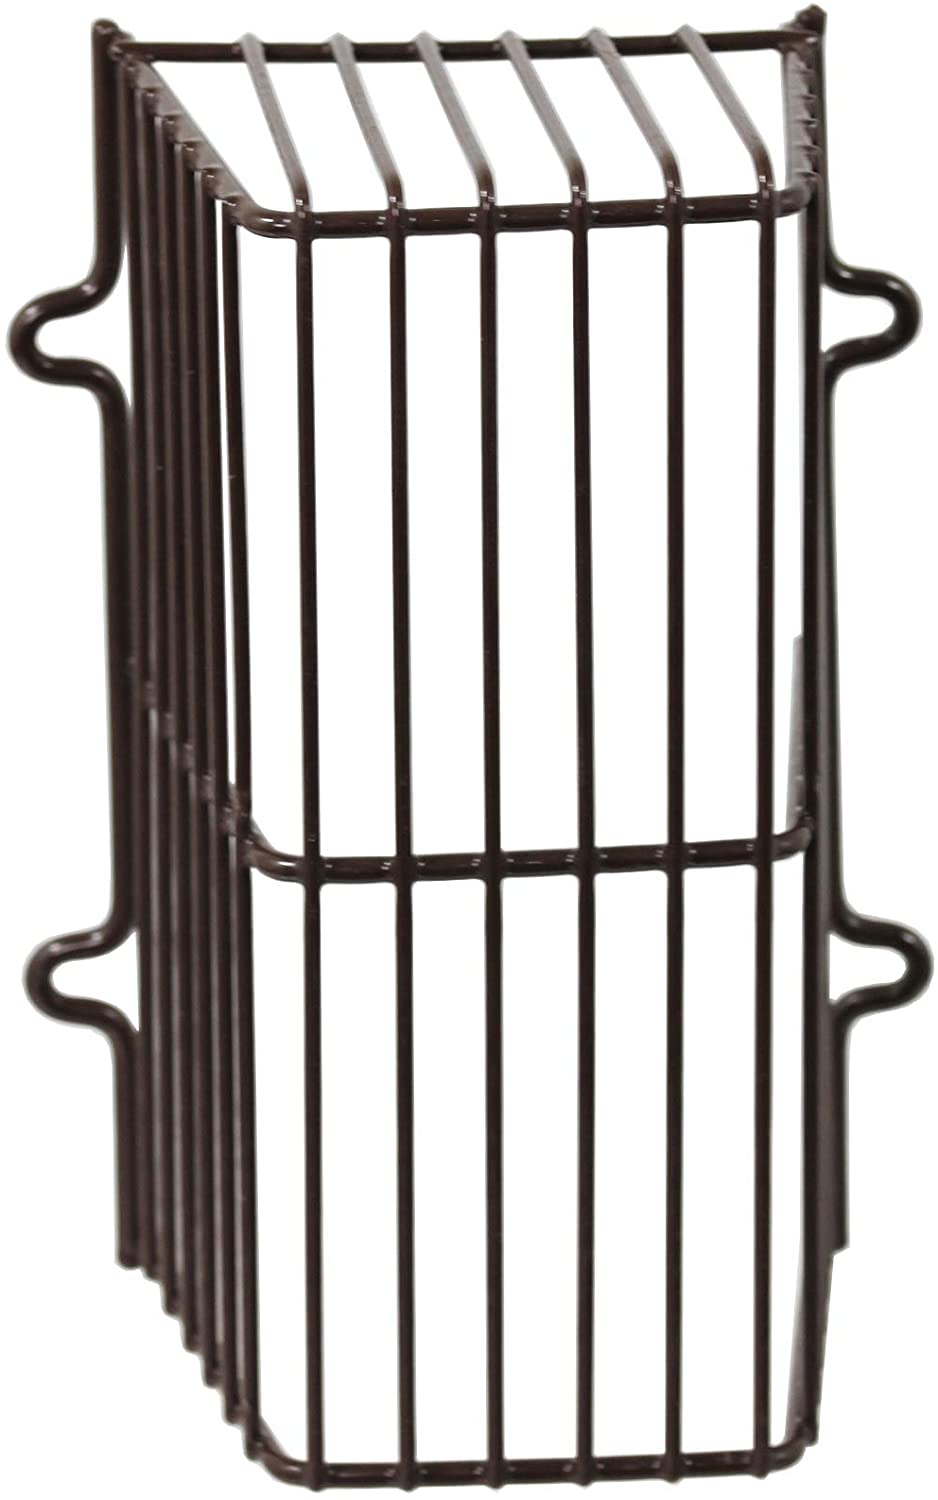 Plastic Coated Overflow Discharge Terminal Guard Boiler Relief Outlet Cover Cage Brown